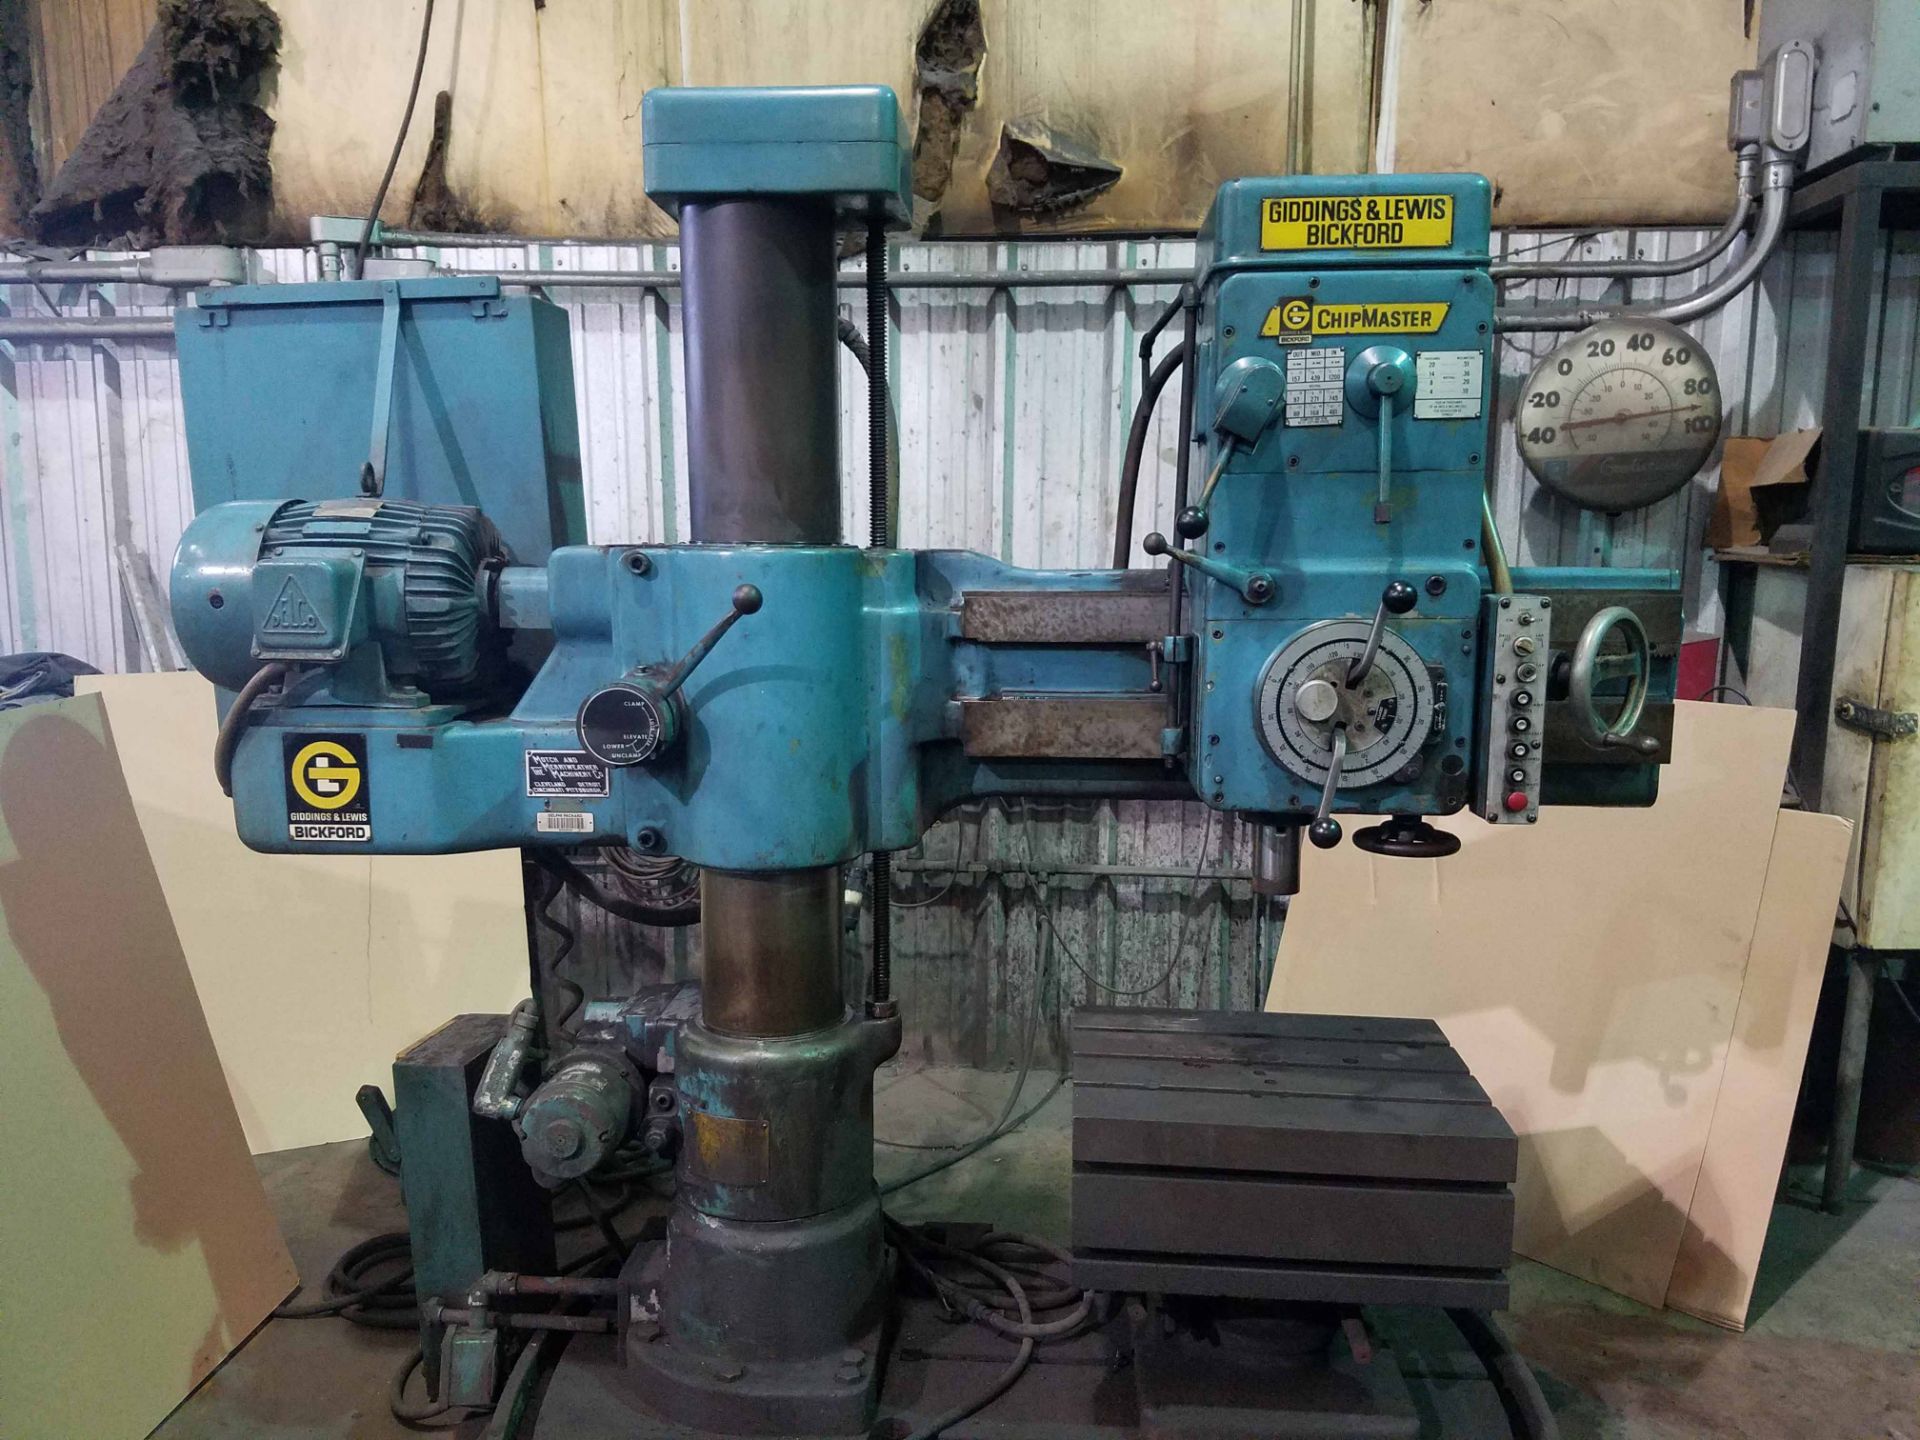 RADIAL ARM DRILL, 3' X 9" GIDDINGS & LEWIS BICKFORD, Chipmaster, S/N 951-00565-74. (Location BB: